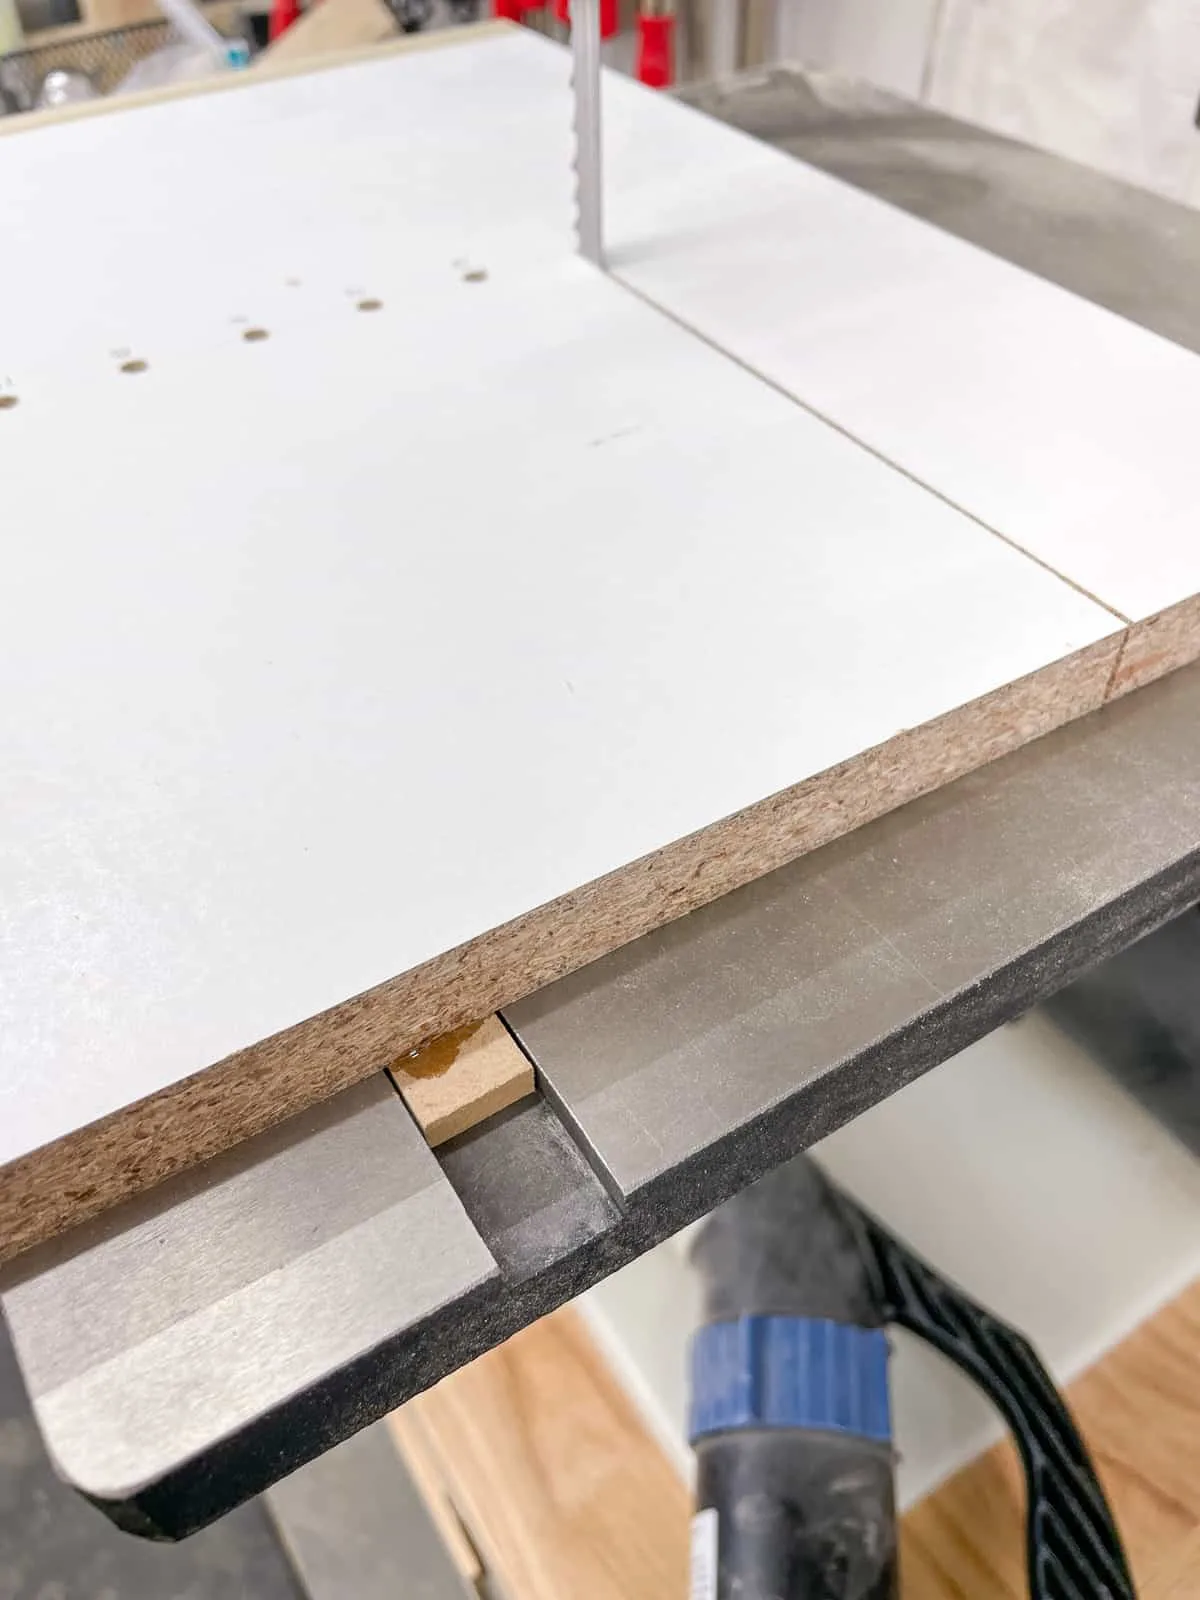 runner attached to underside of bandsaw circle jig